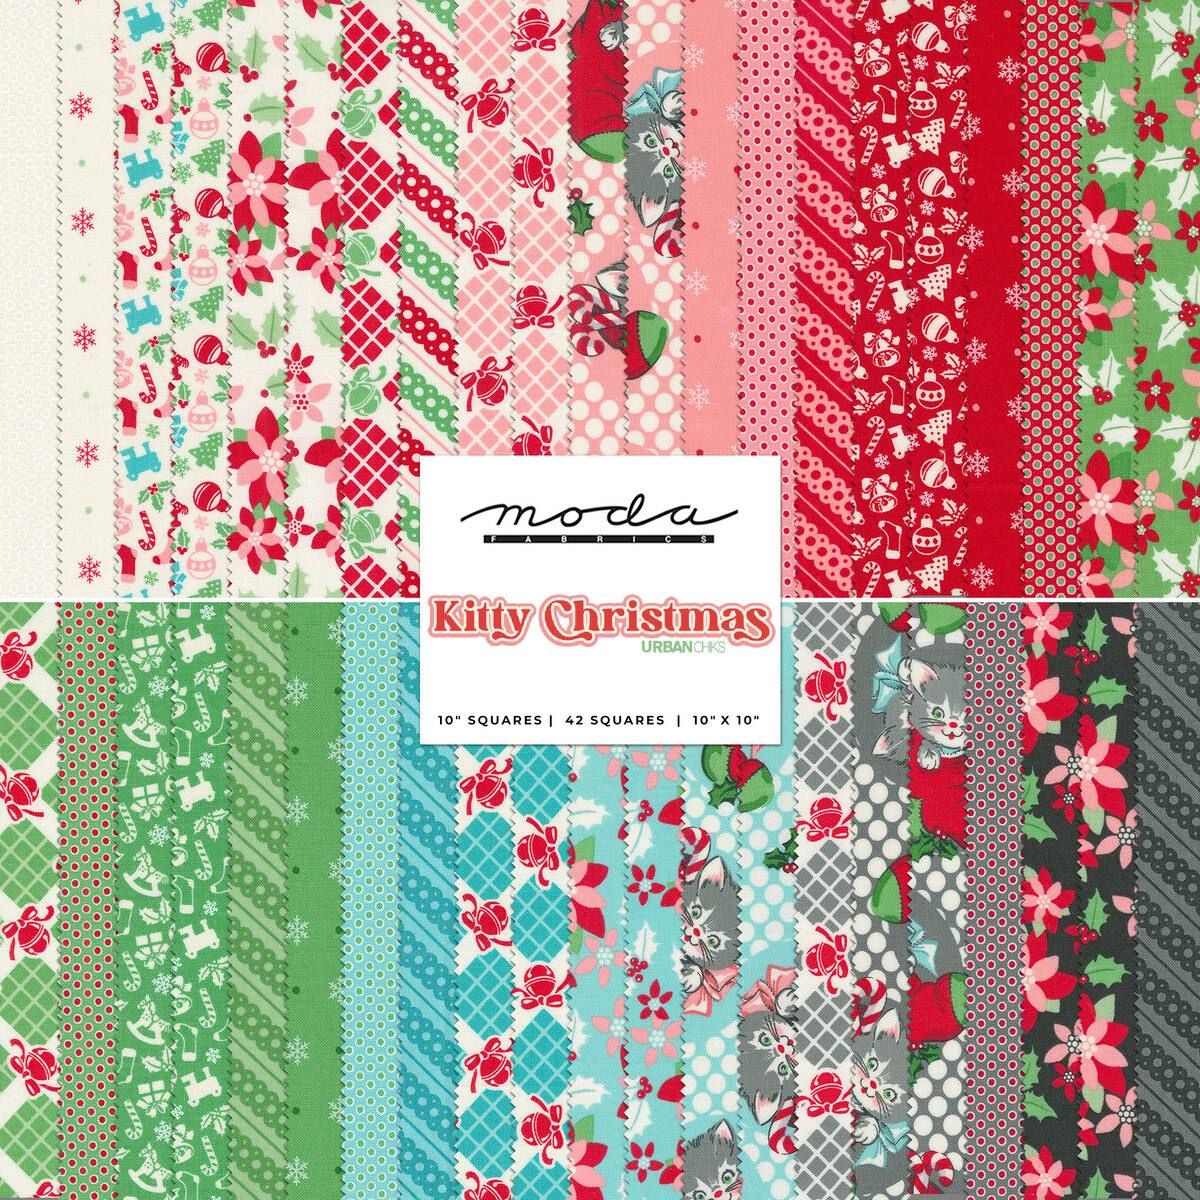 Kitty Christmas Layer Cake by Urban Chiks for Moda Fabrics